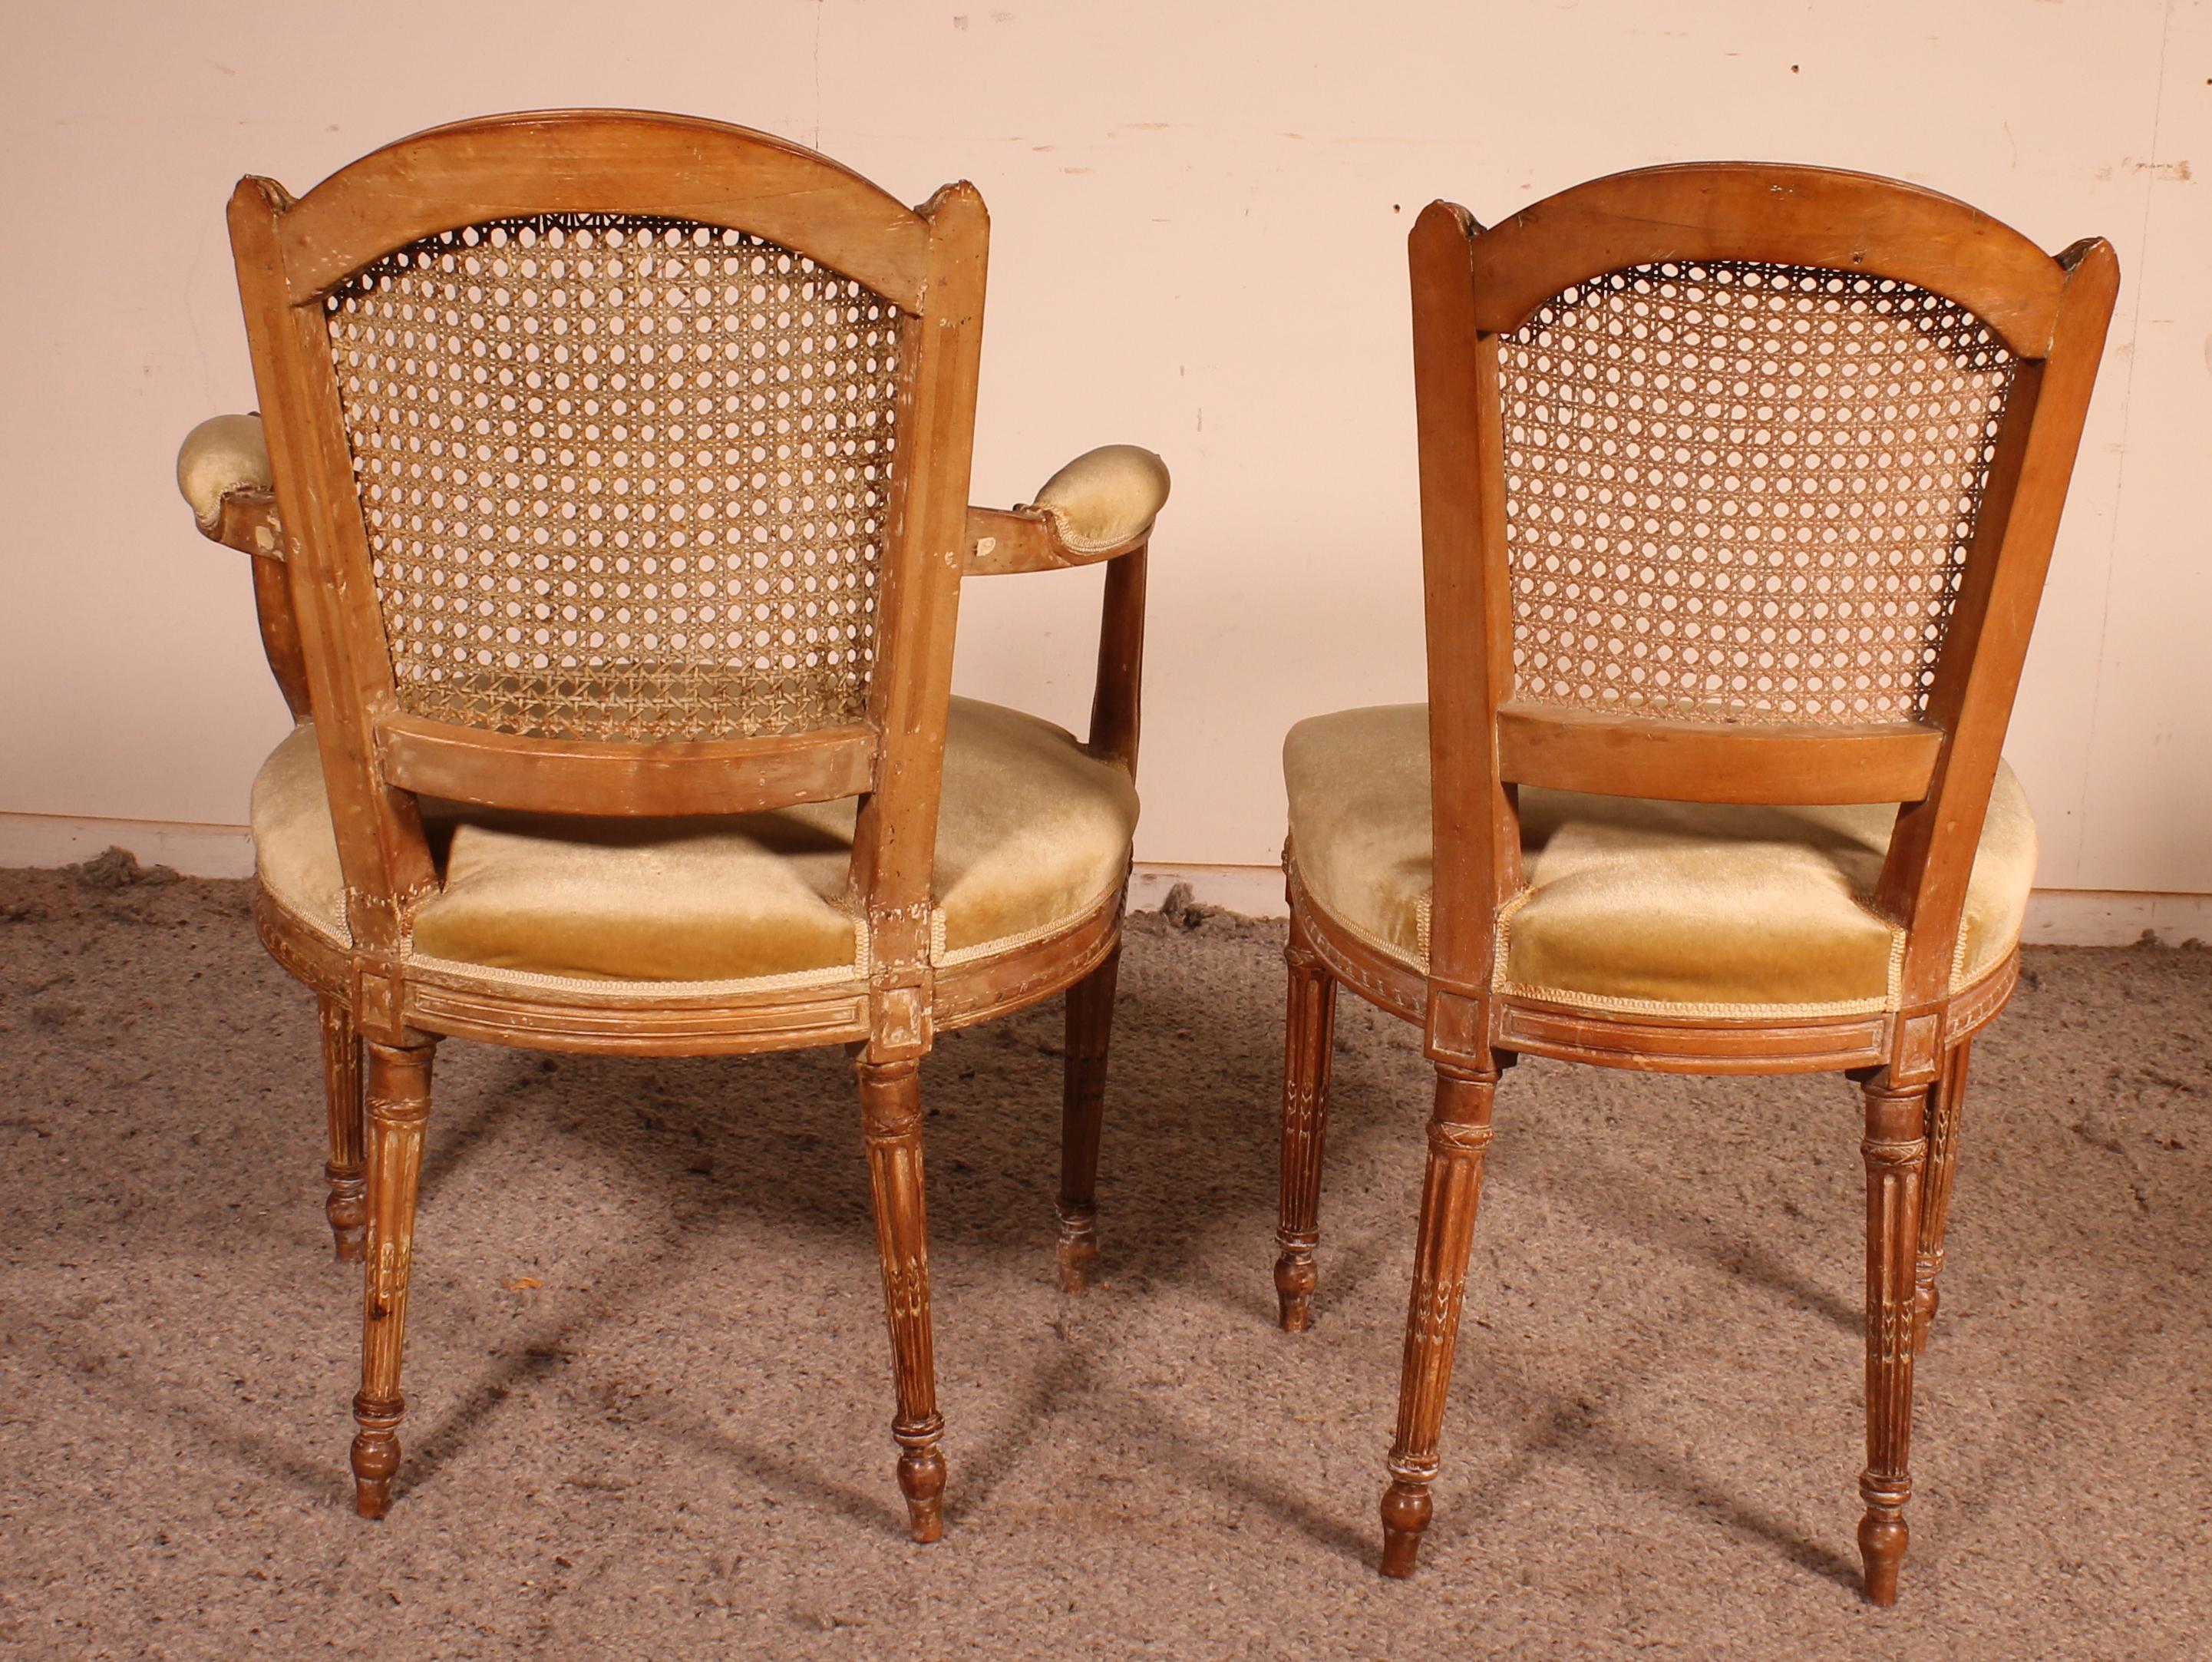 Fruitwood Set of 6 Chairs and Two Louis XVI Armchairs, 18th Century For Sale